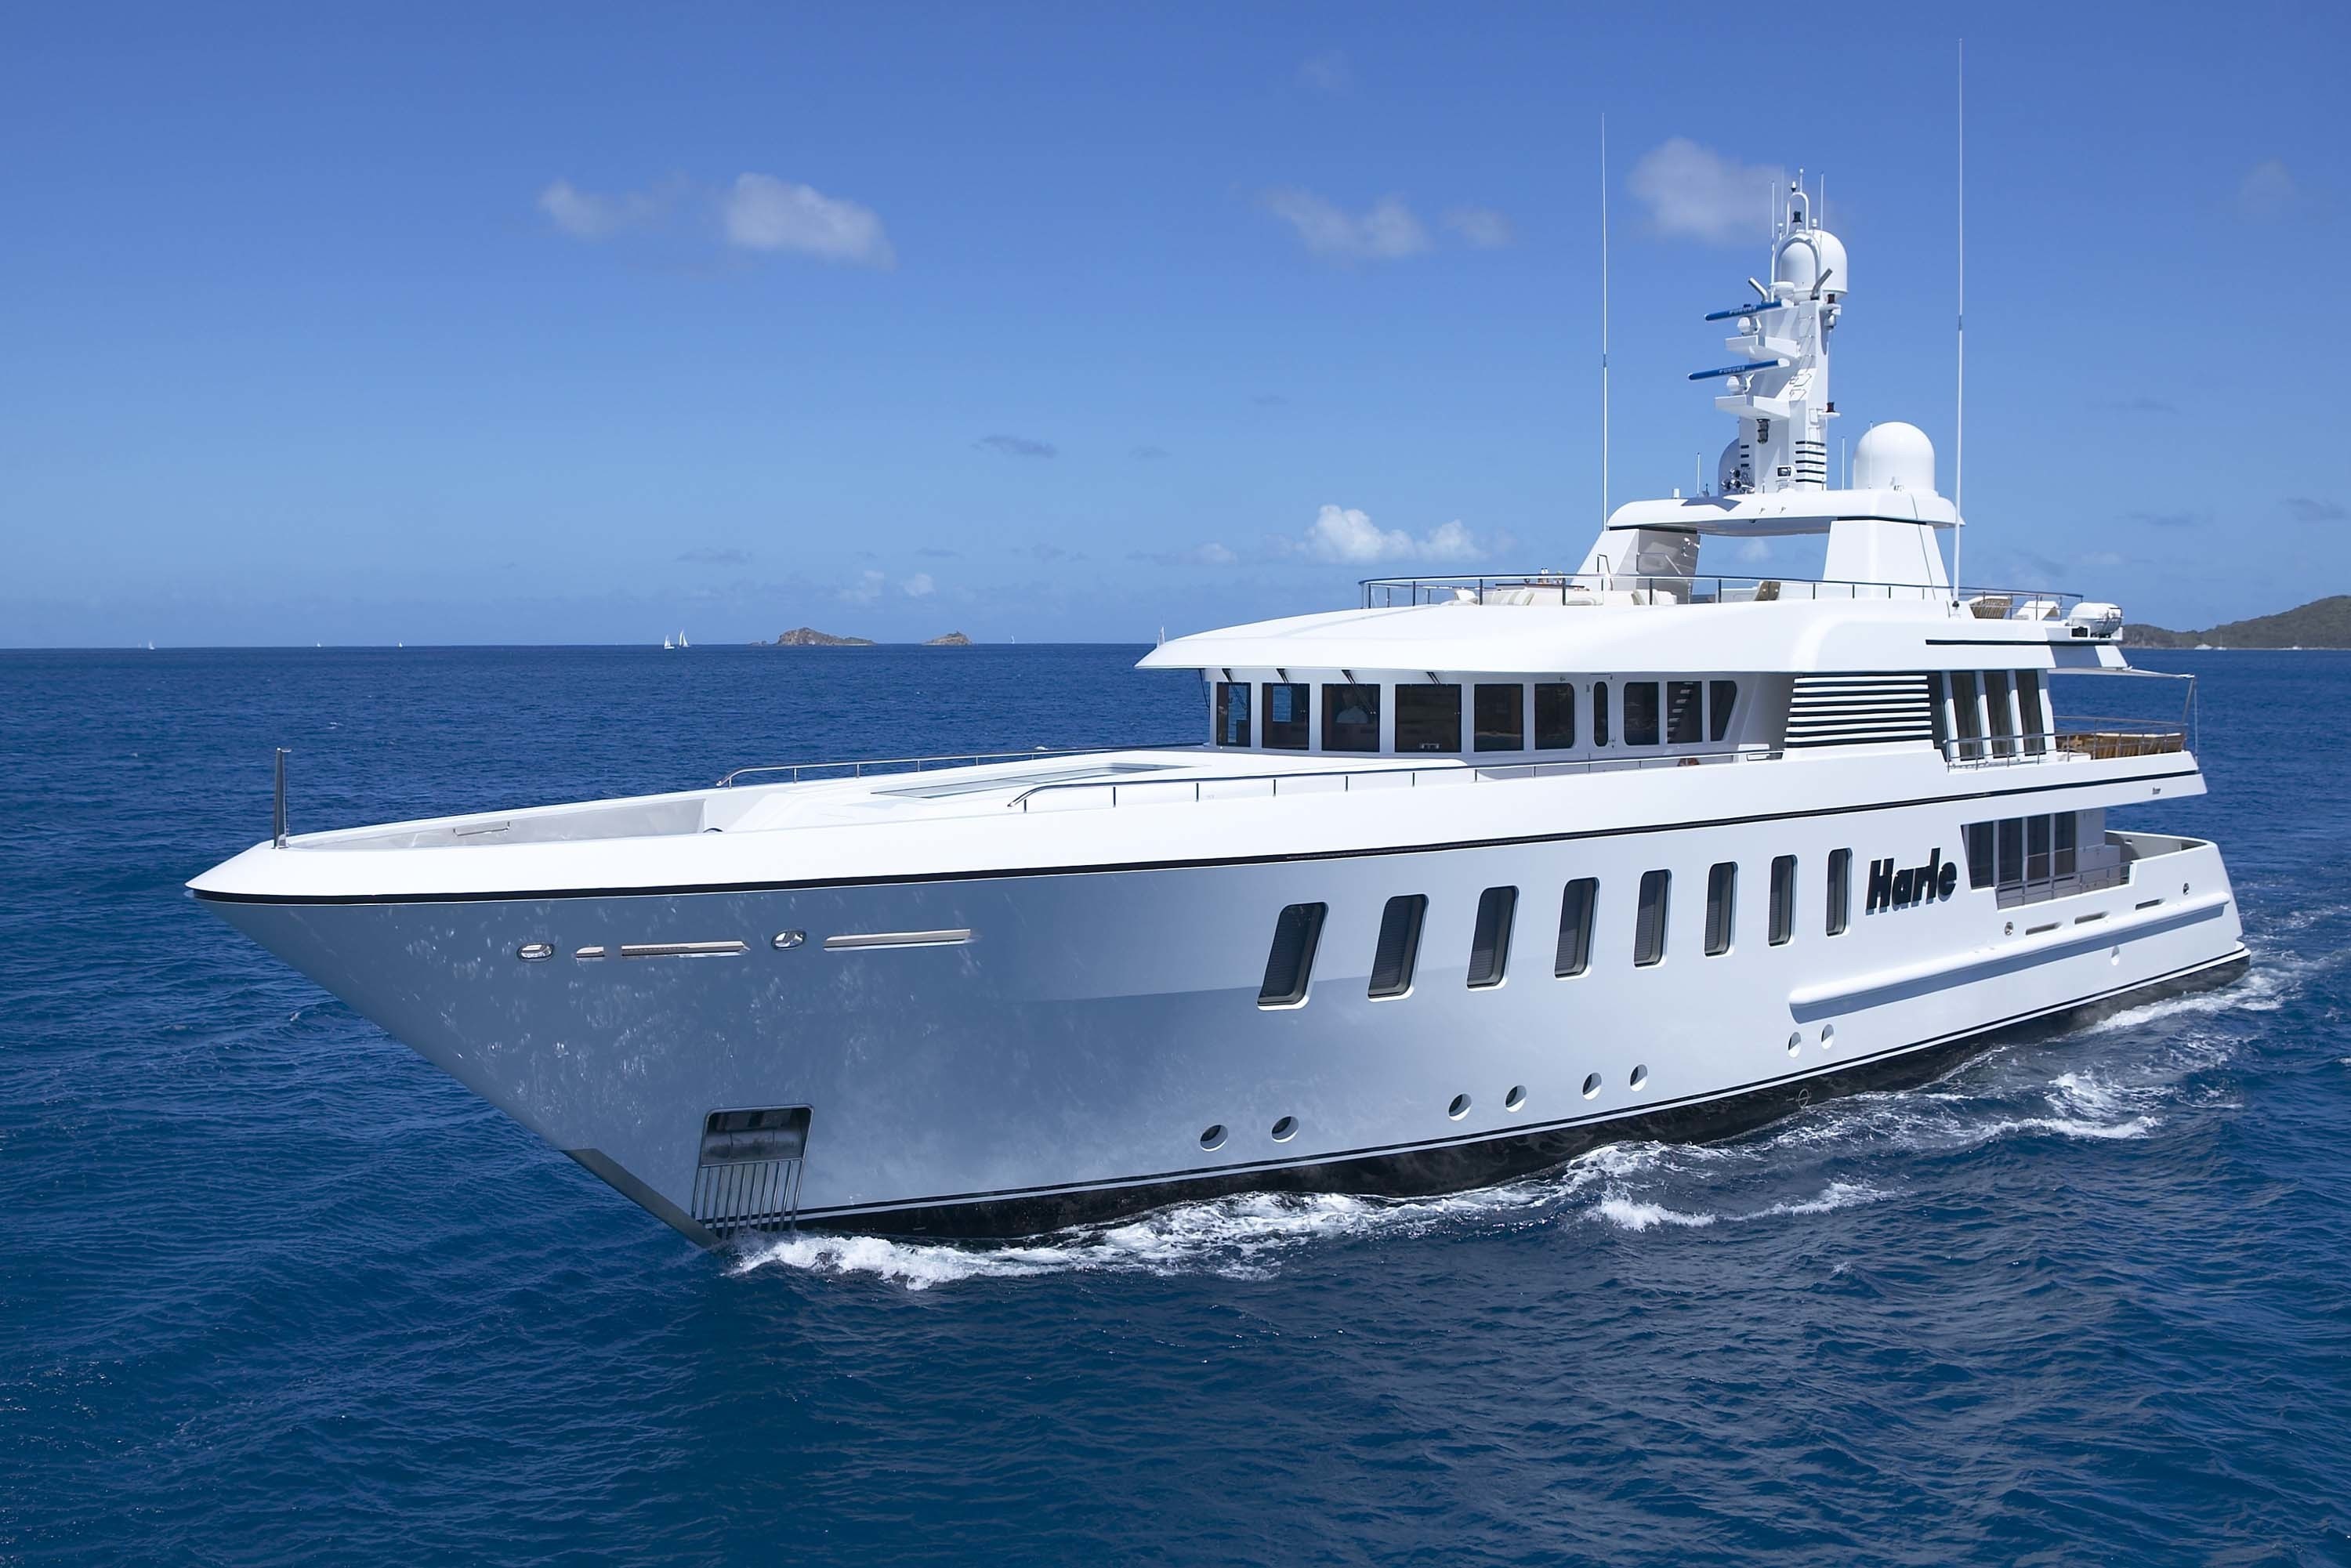 Premier Overview Aboard Yacht HARLE